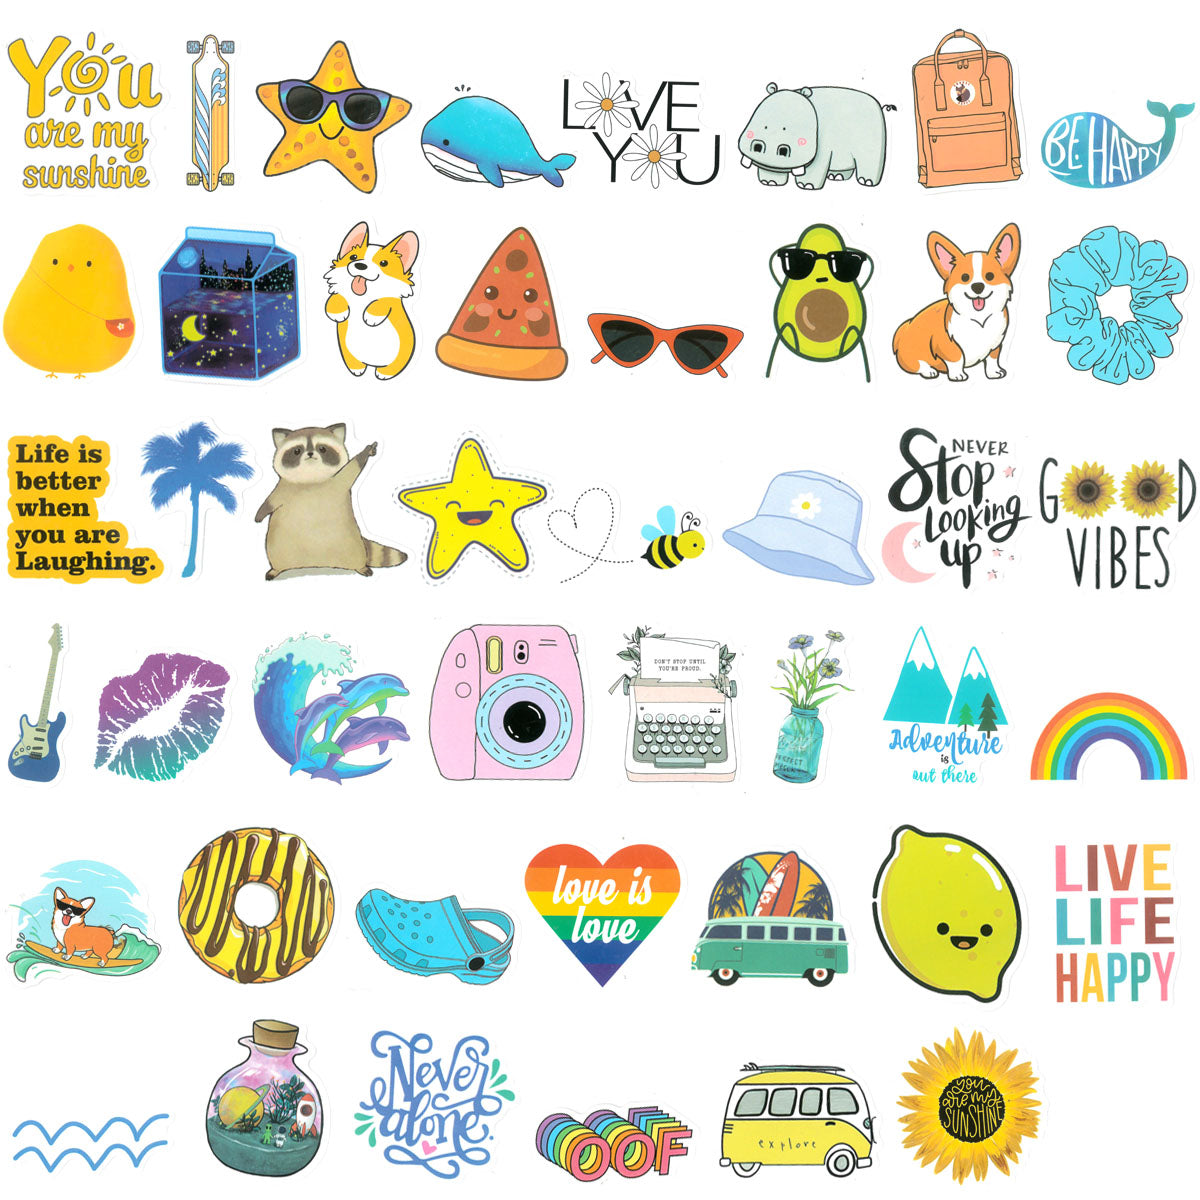 Wrapables Waterproof Vinyl Stickers for Water Bottles, Laptop, Phones, Skateboards, Decals for Teens 100pcs, Be Cool